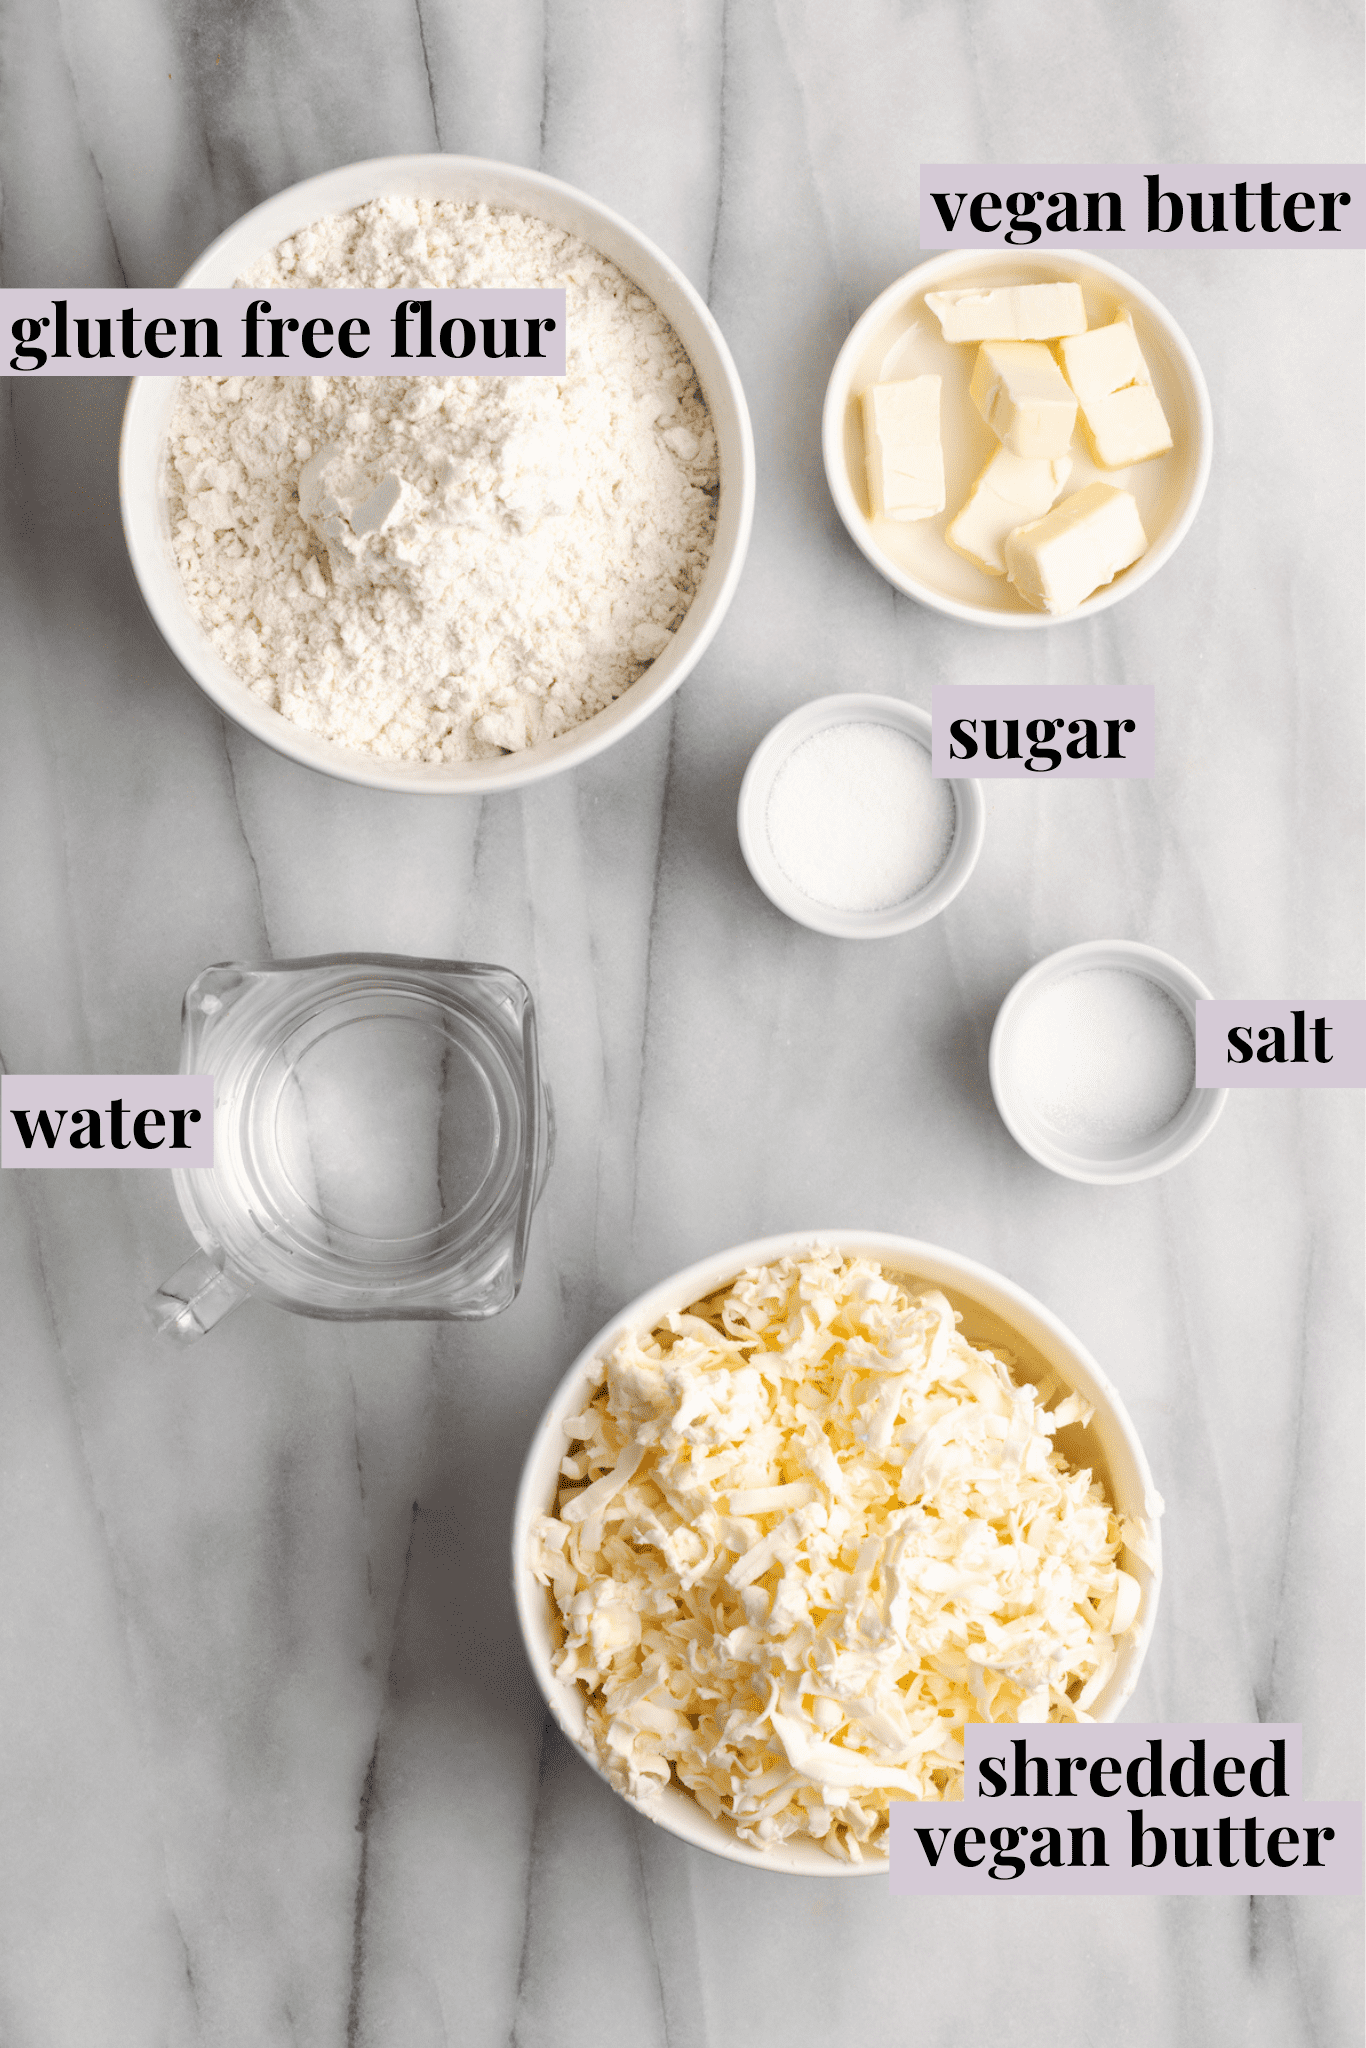 Overhead view of the ingredients for vegan puff pastry: a bowl of gluten-free dough, a glass of water, a bowl of salt, a bowl of sugar, a bowl of cubed vegan butter, and a bowl of shredded vegan butter